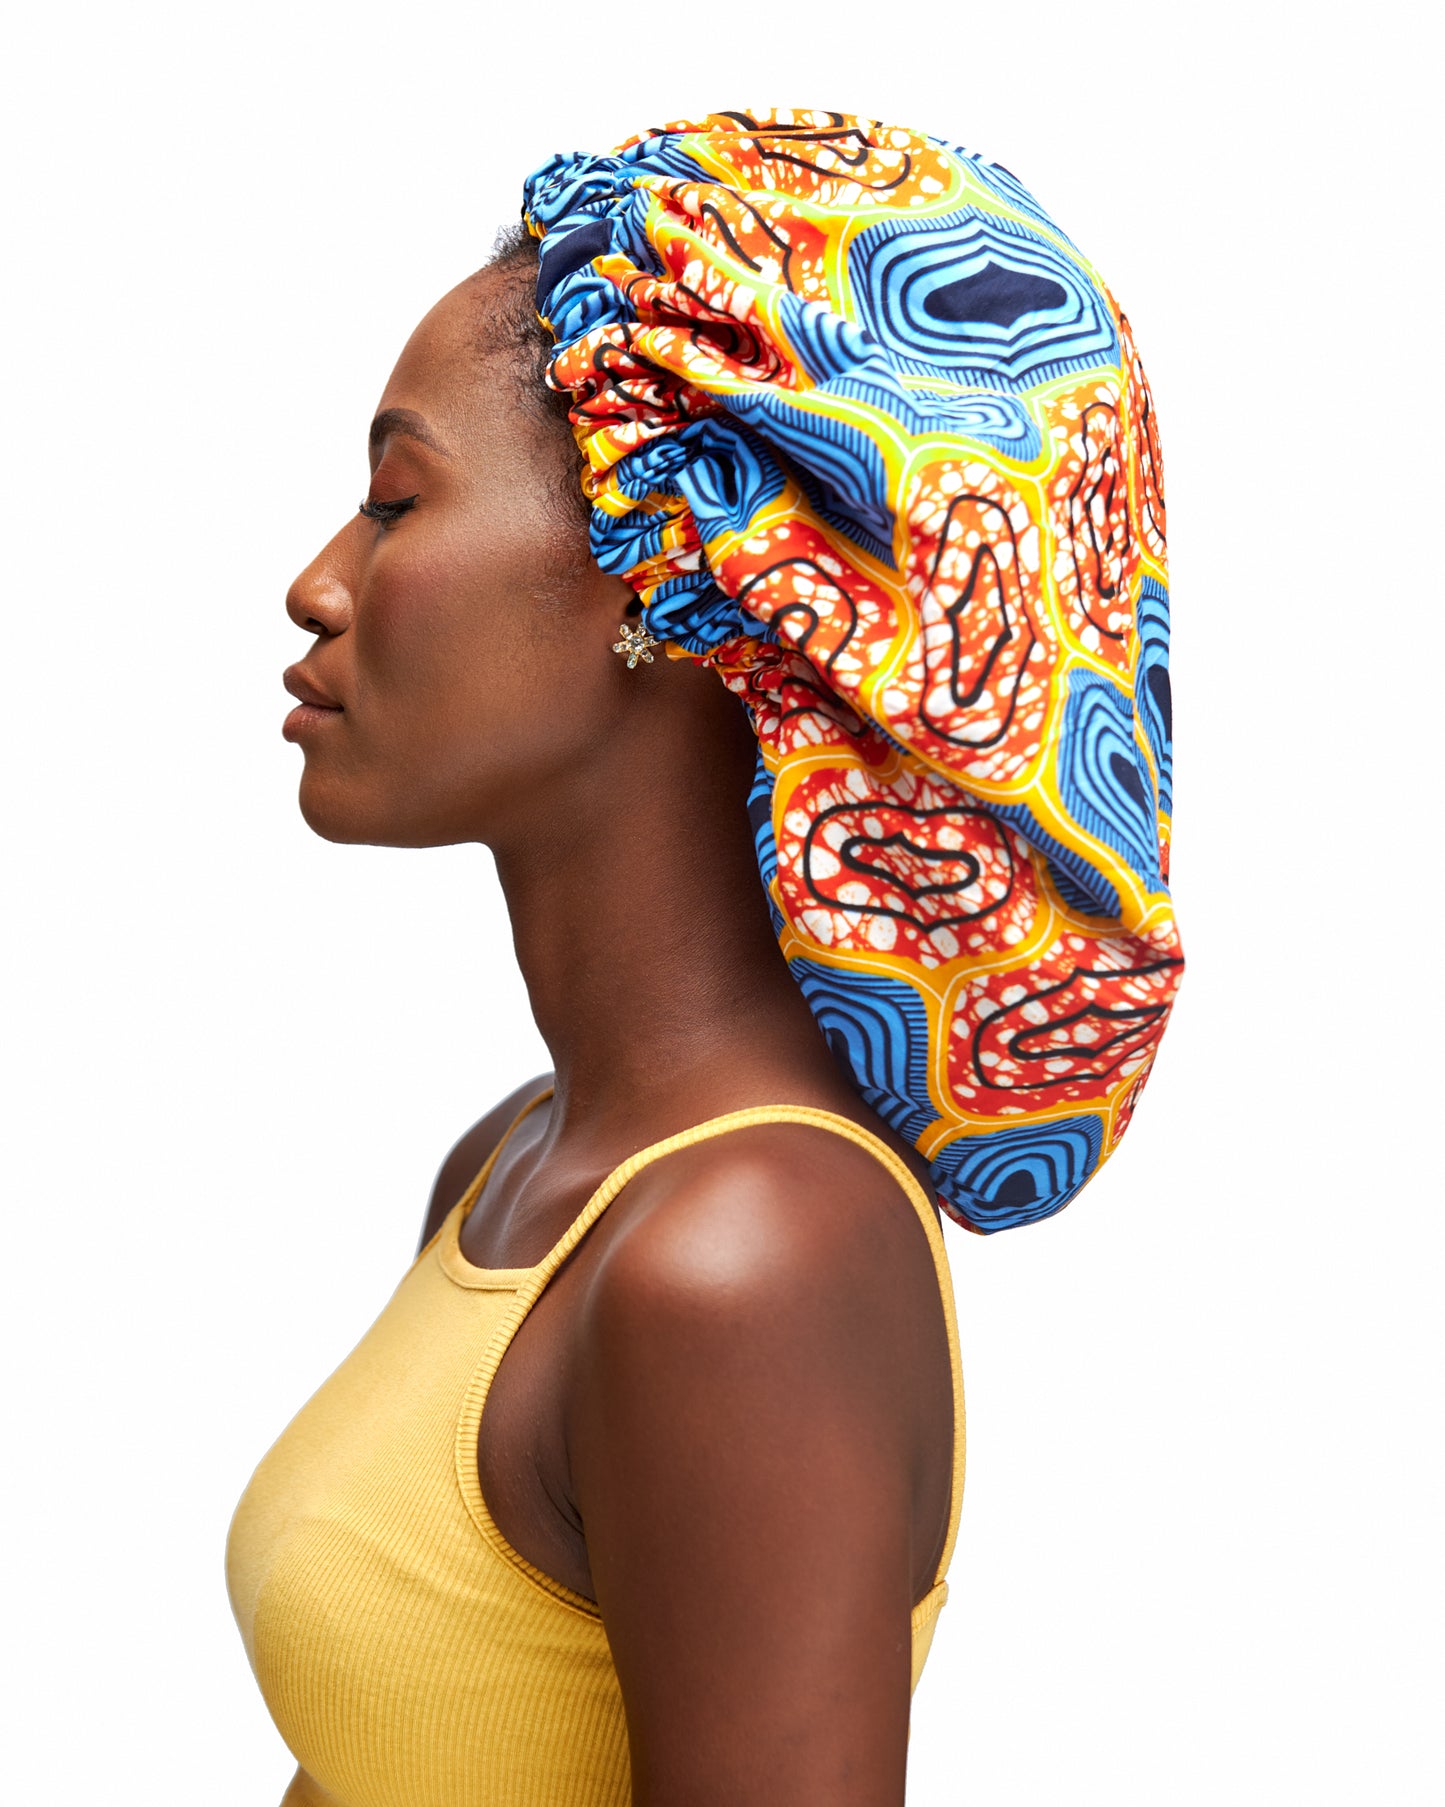 An Ankara Wax Print Made of Orange,White, Yellow, Seablue And Black Blend of Beautiful Colours And Pattern, Hand Made Elastic With Yellow Silk Lined Hair Bonnet